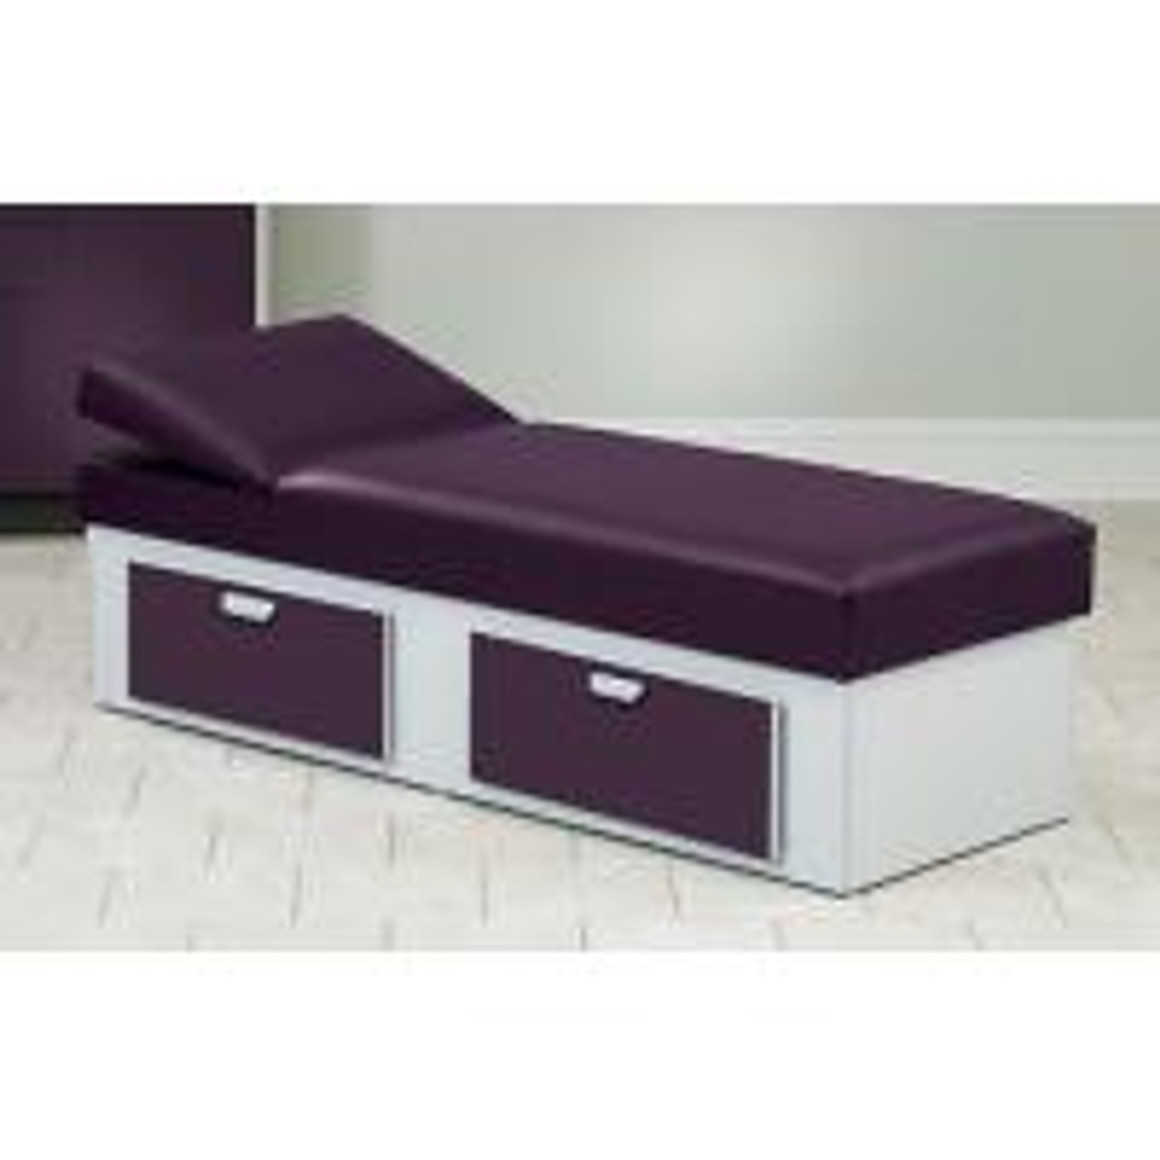 Clinton Upholstered Apron Couch with 2 Drawer Storage, Adjustable Pillow Wedge, Aubergine